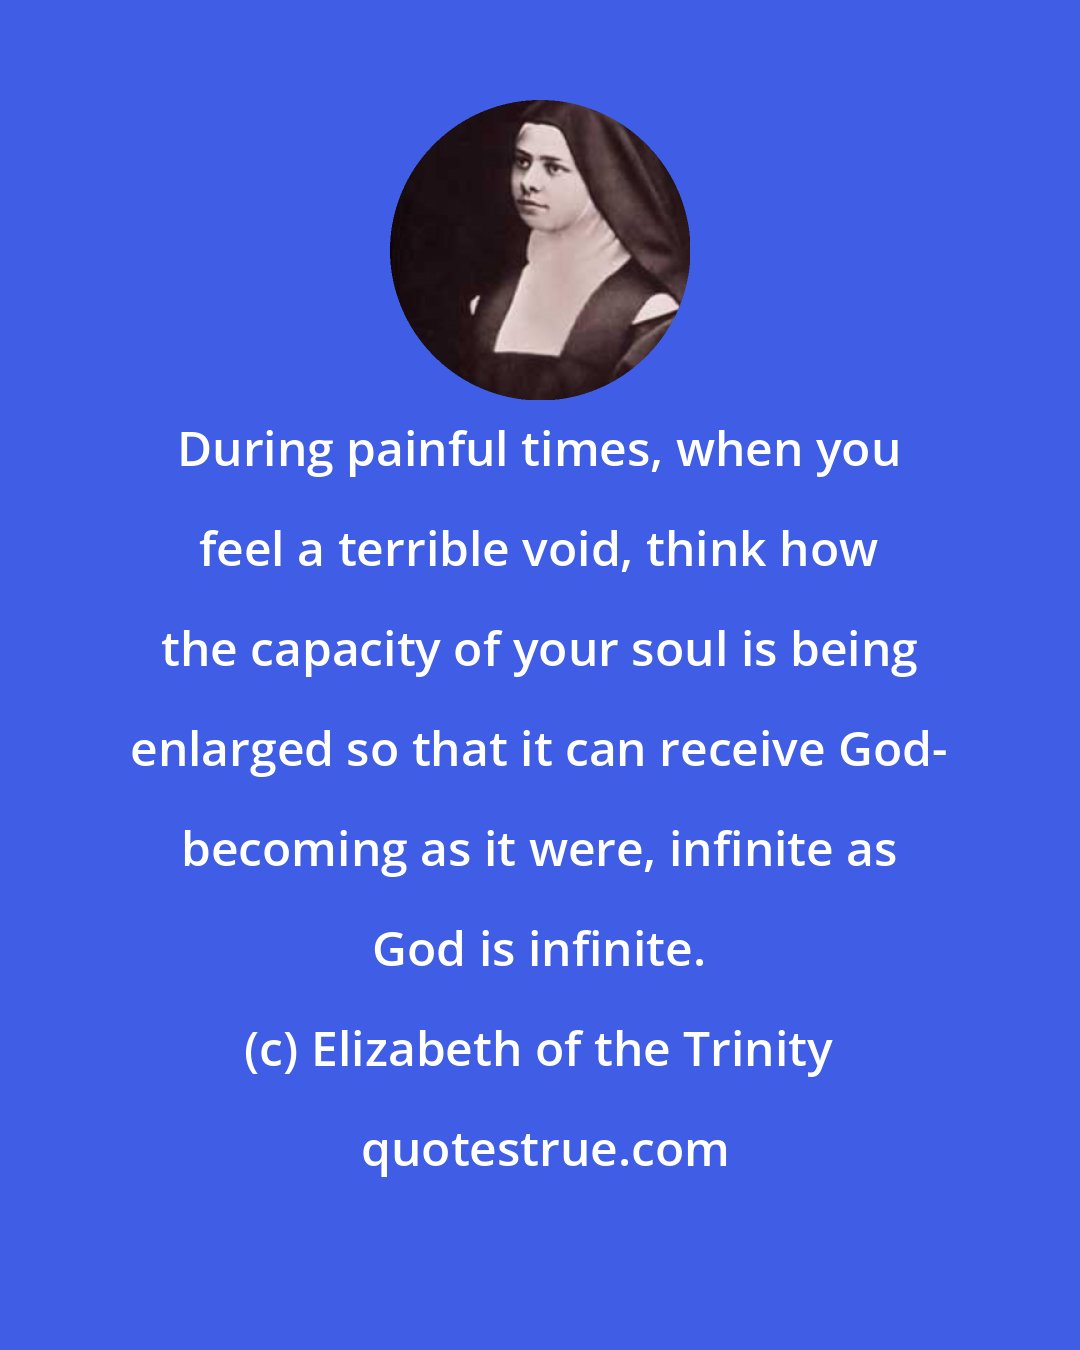 Elizabeth of the Trinity: During painful times, when you feel a terrible void, think how the capacity of your soul is being enlarged so that it can receive God- becoming as it were, infinite as God is infinite.